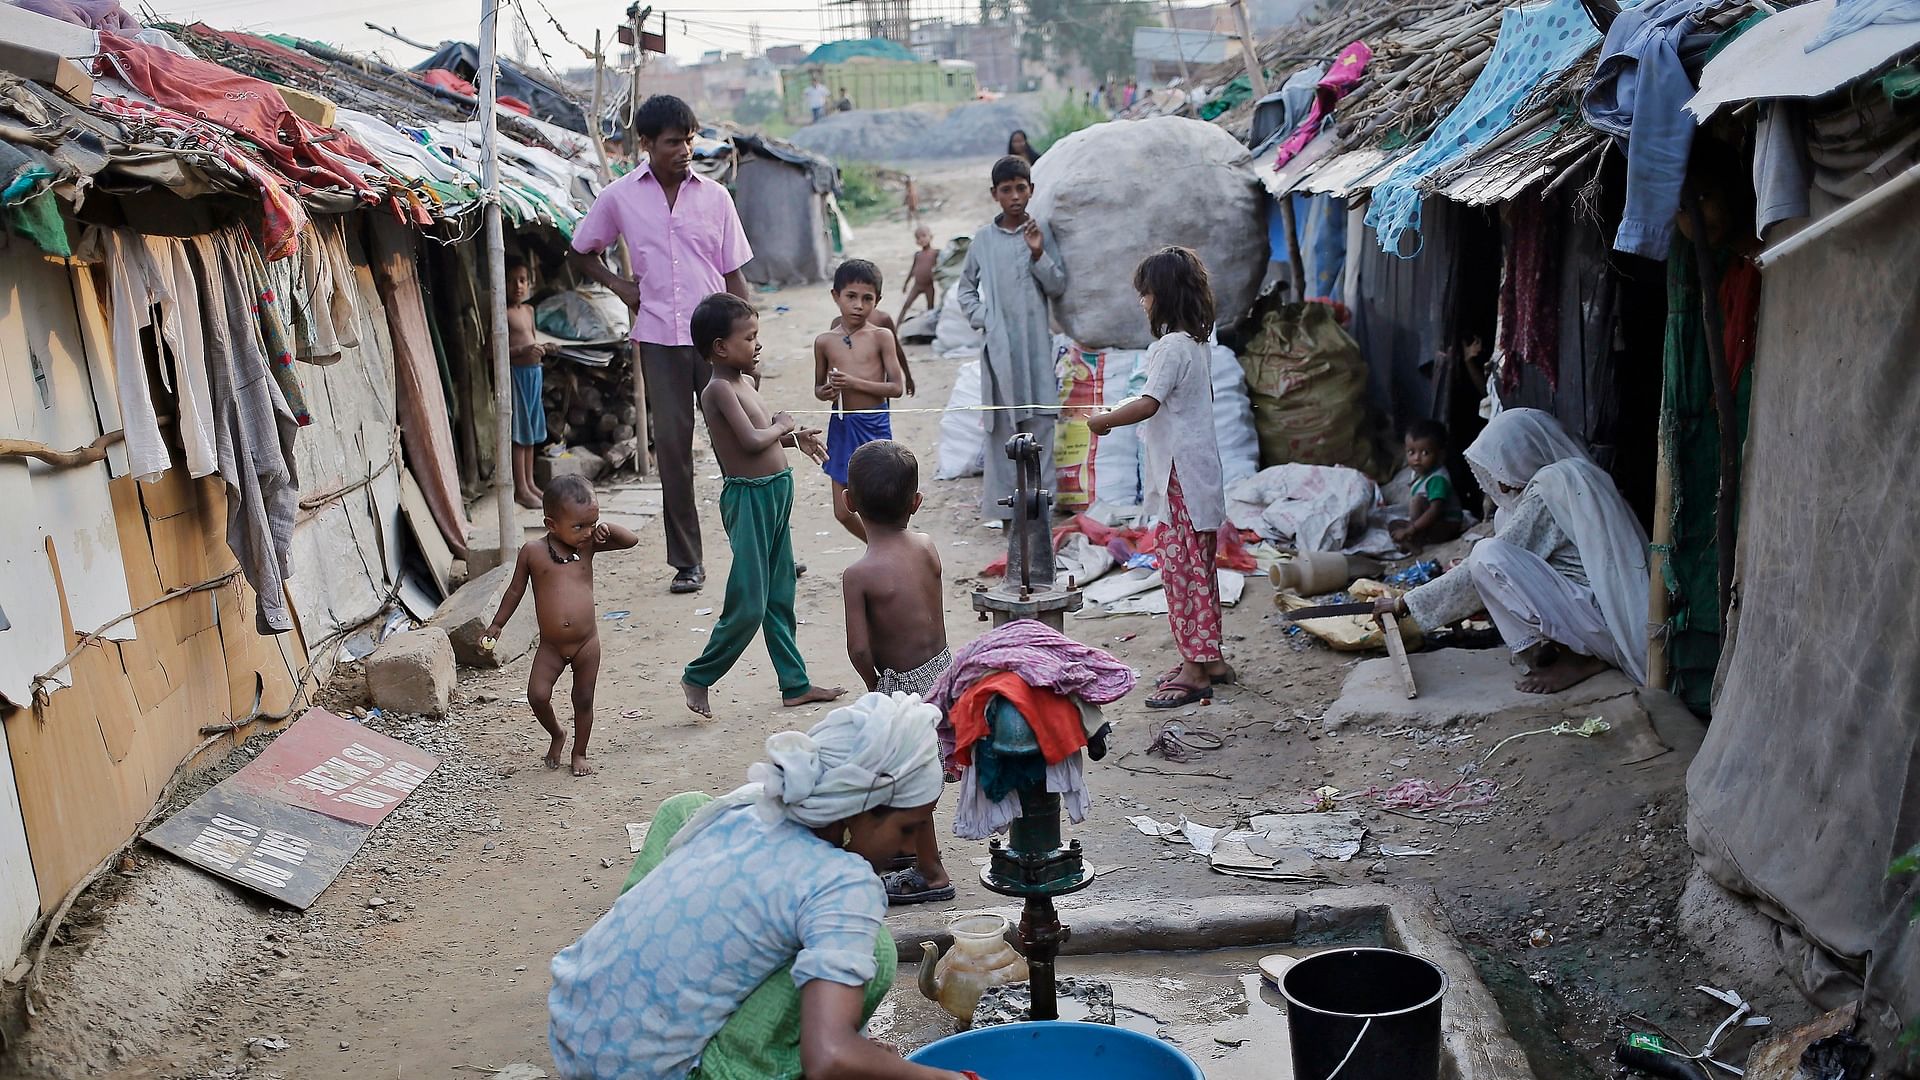  A woman washes clothes inside a Rohingya camp in India&nbsp;(Photo: Reuters)&nbsp;